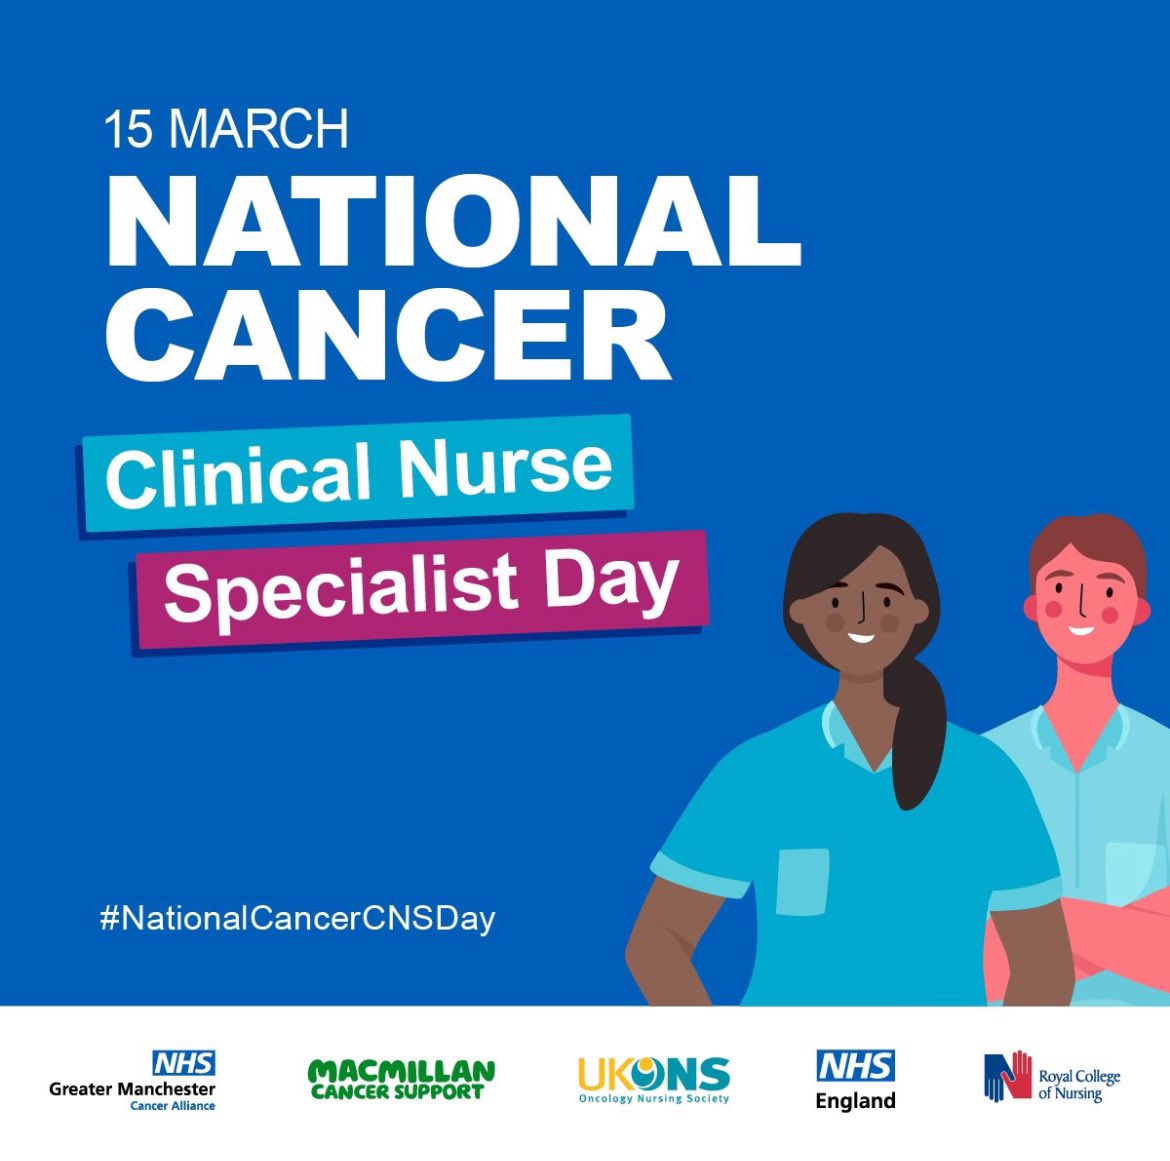 Happy #CancerCNSDay to our @WestHertsNHS Cancer CNSs who are not only compassionate considerate BUT the most amazing team who support patients, families & colleagues through a very difficult time. THANK YOU for everything you do.. One of my favourite jobs.